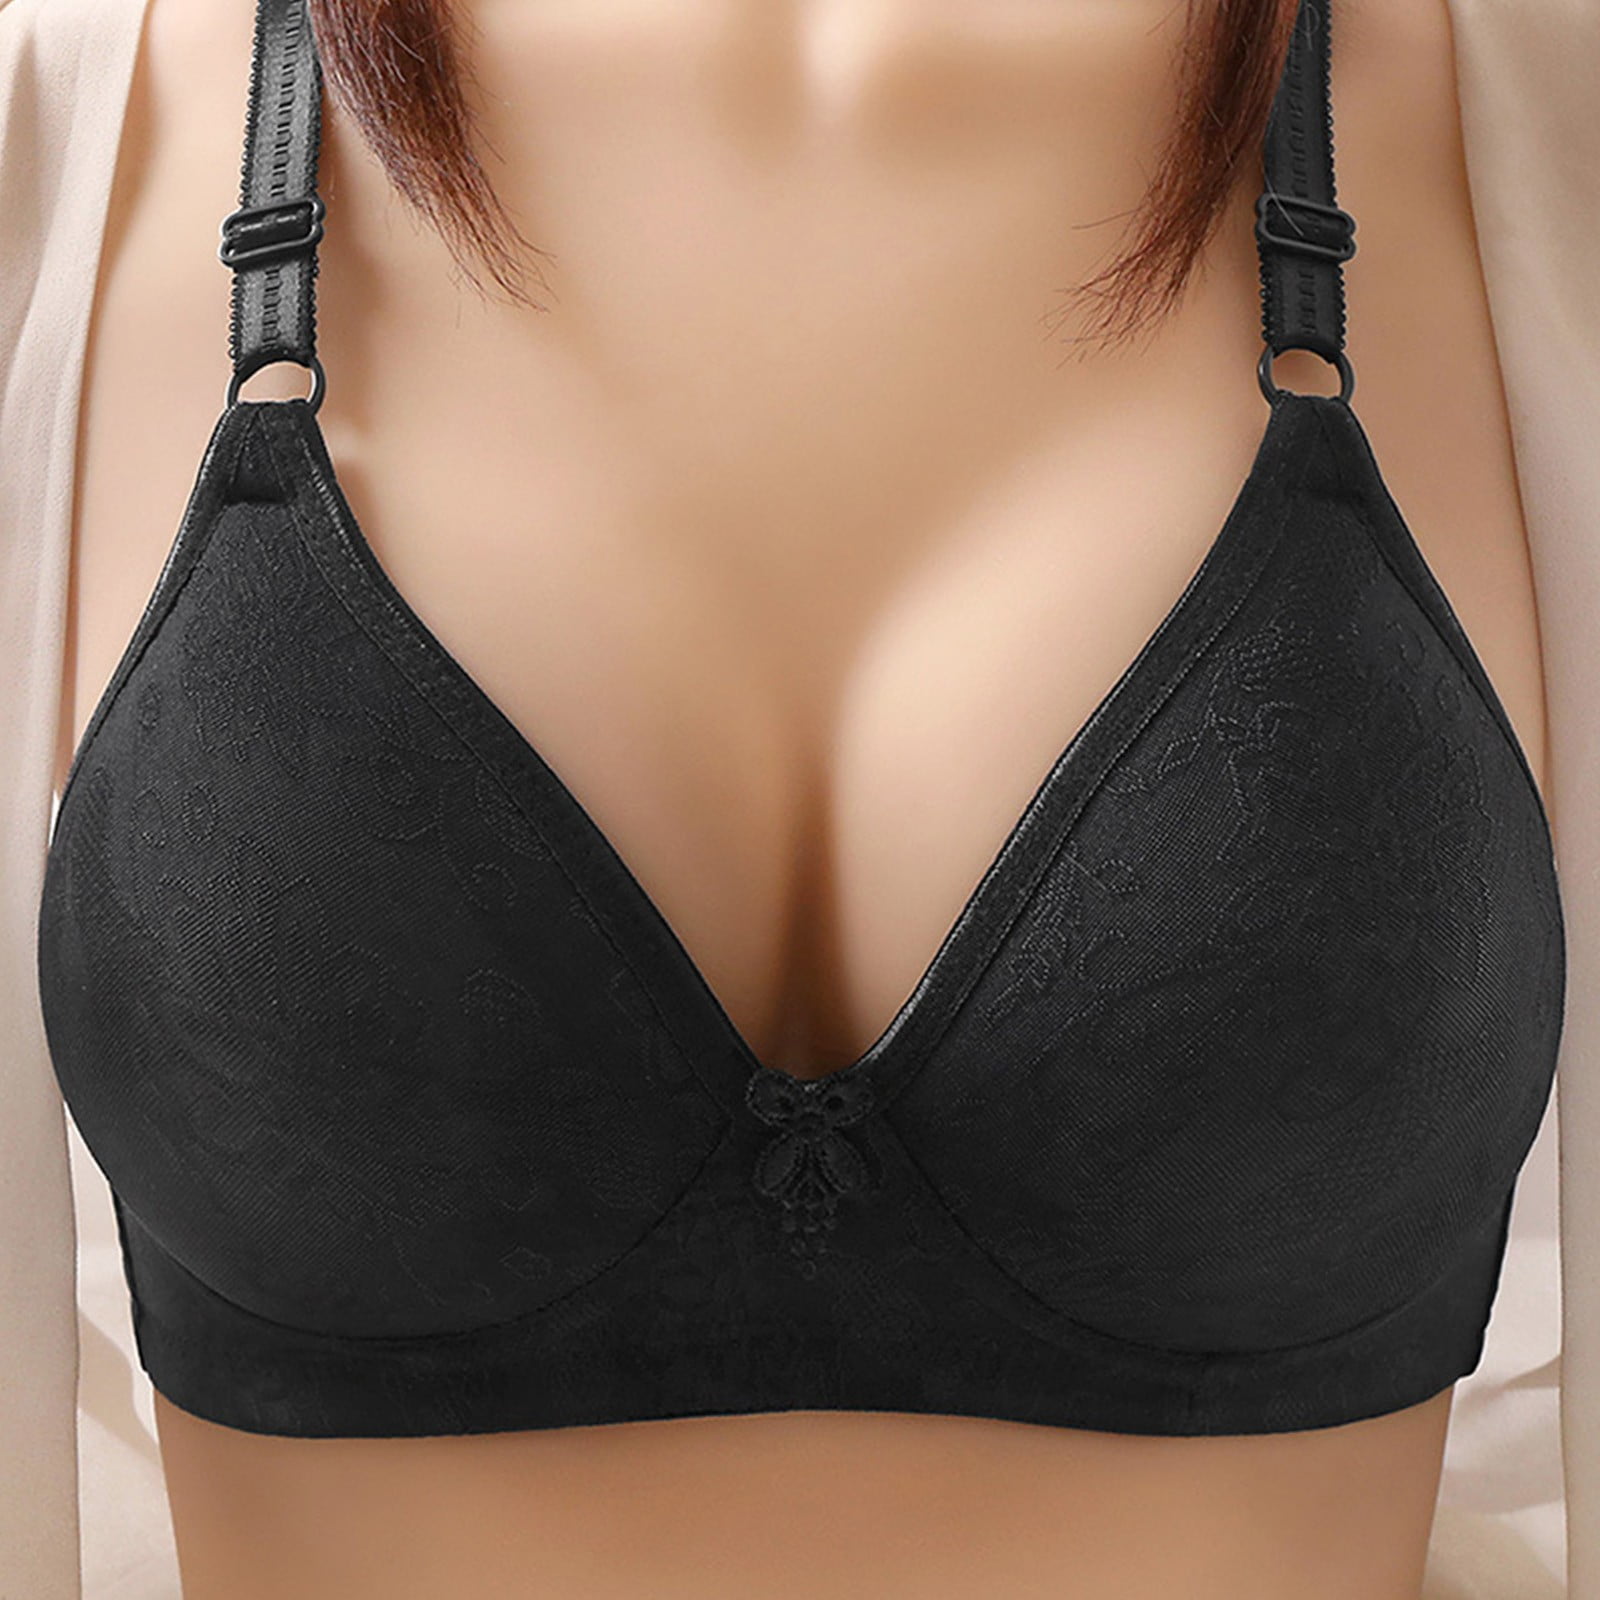 YWDJ Bras for Women Push Up No Underwire Lace Everyday for